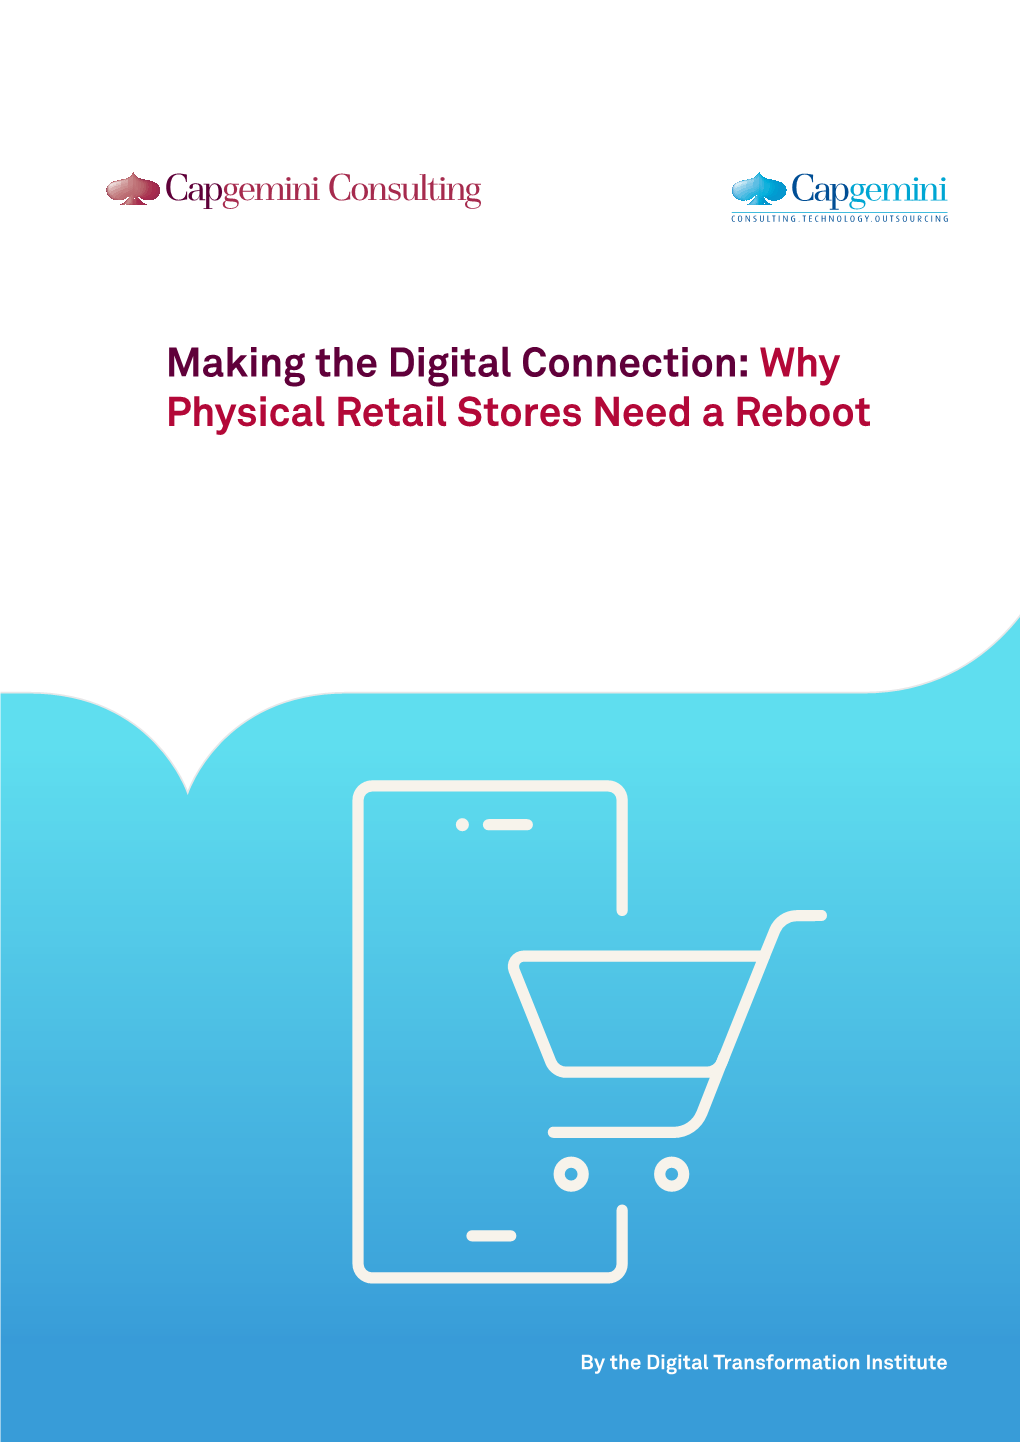 Making the Digital Connection: Why Physical Retail Stores Need a Reboot